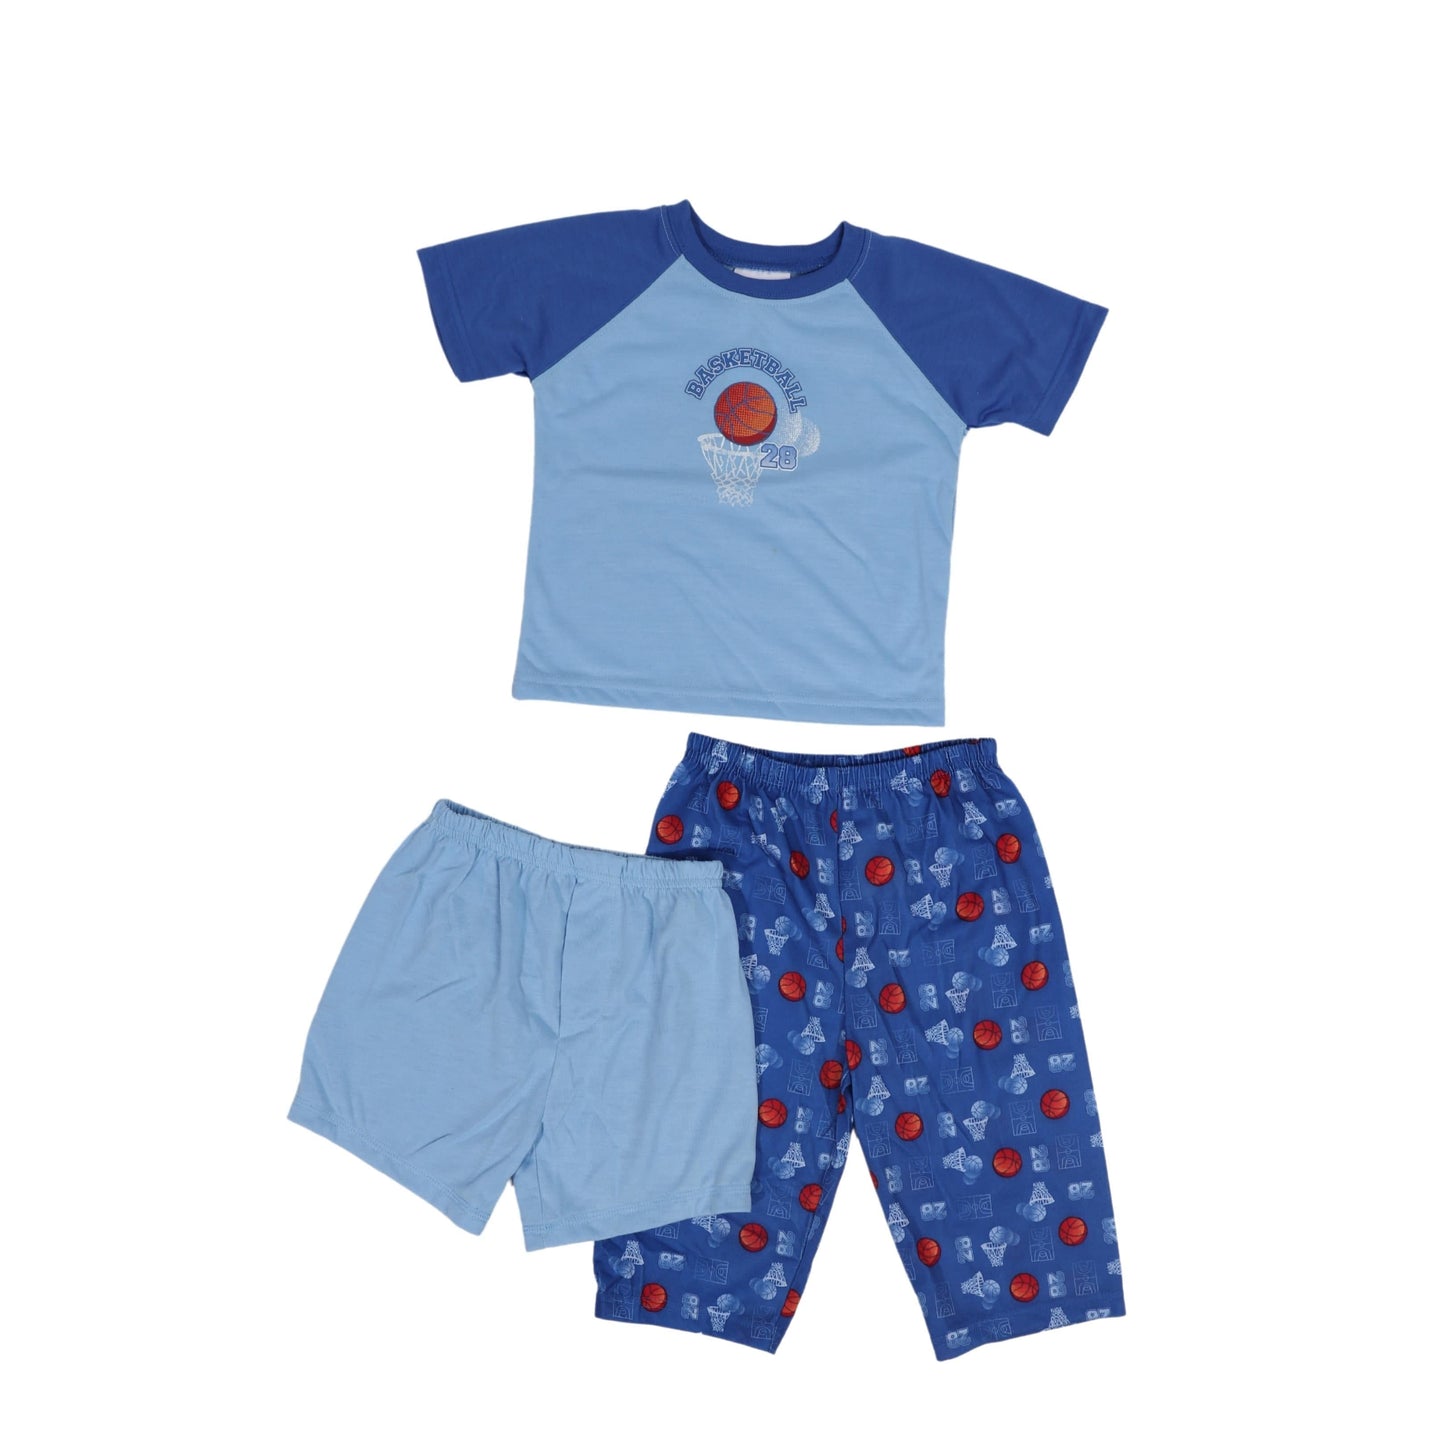 JUST ONE MONTH Baby Boy 18 Month / Blue JUST ONE MONTH - Basket Ball Printed Pajama